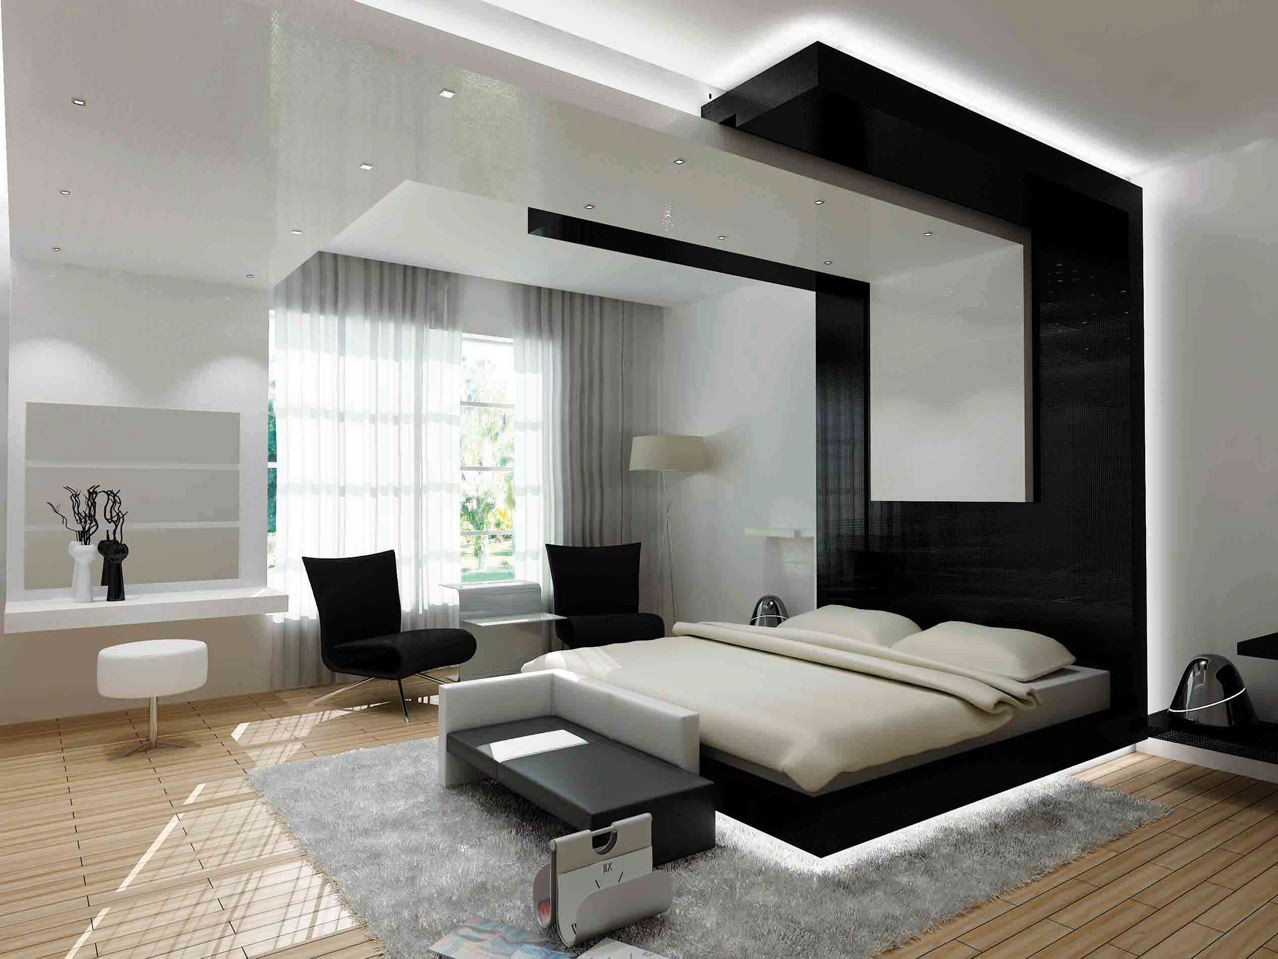 Modern Bedroom Art
 30 Contemporary Bedroom Design For Your Home – The WoW Style